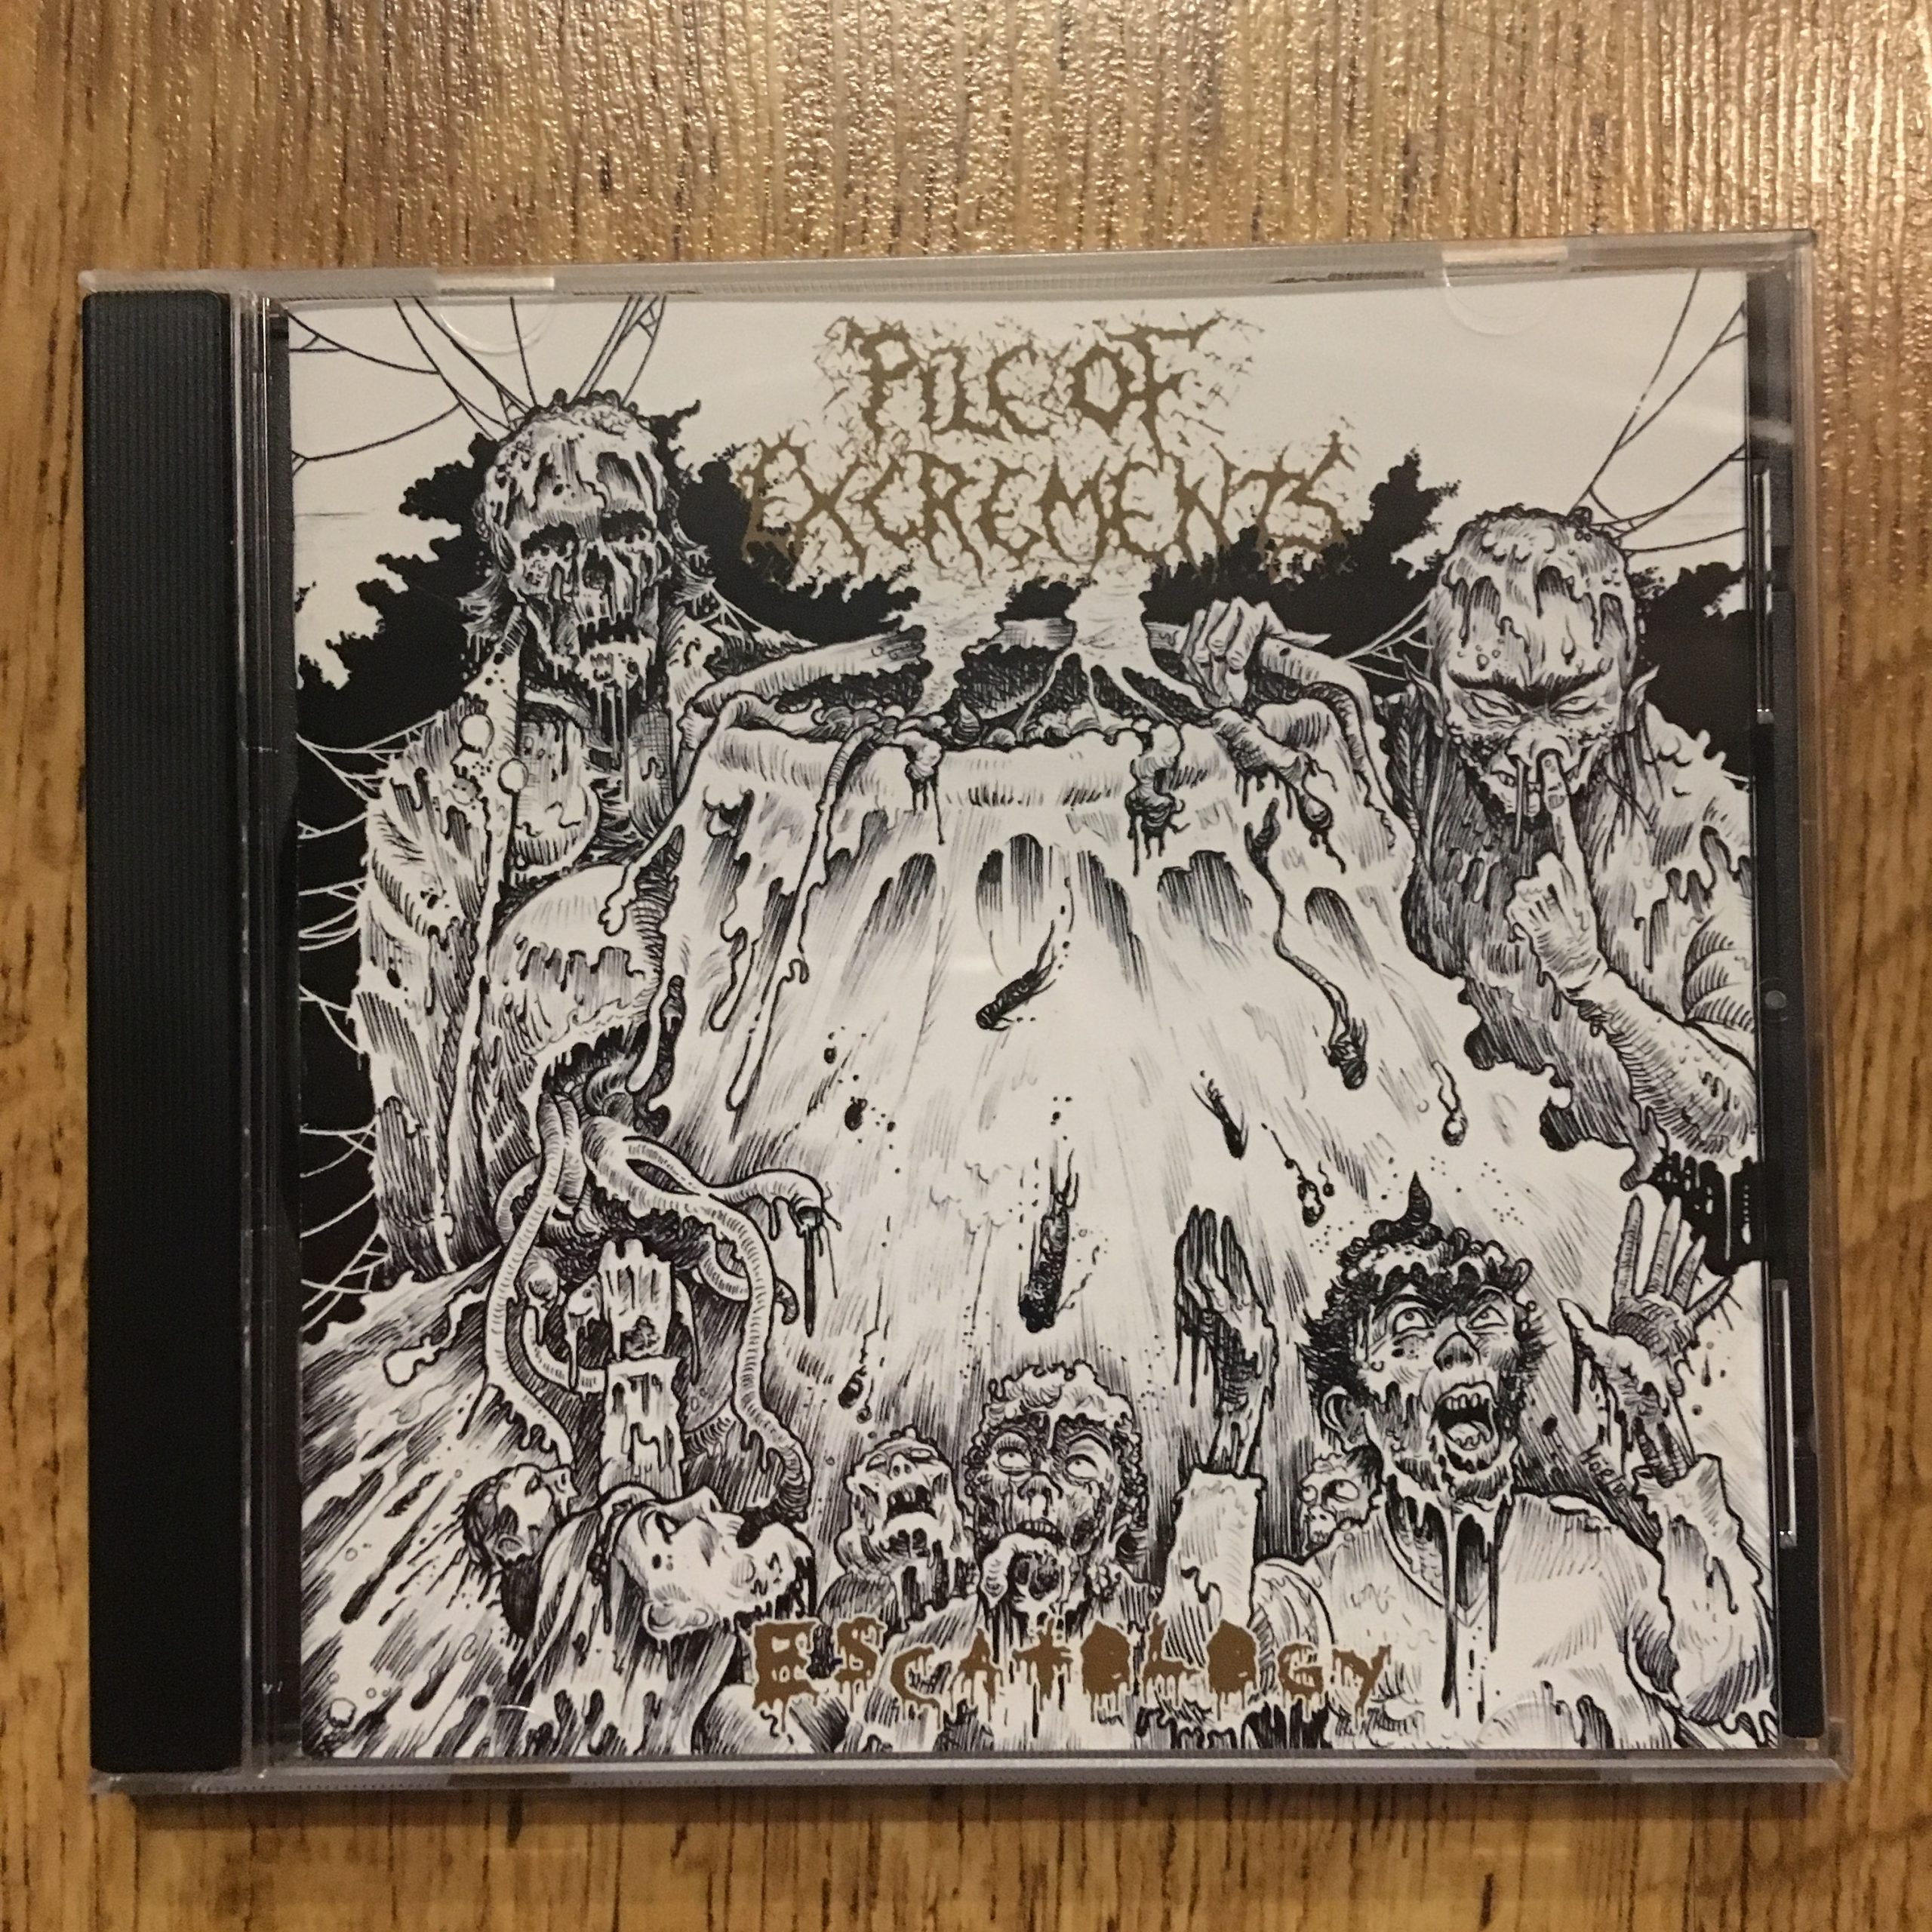 Photo of the Pile of Excrements - "Escatology" CD